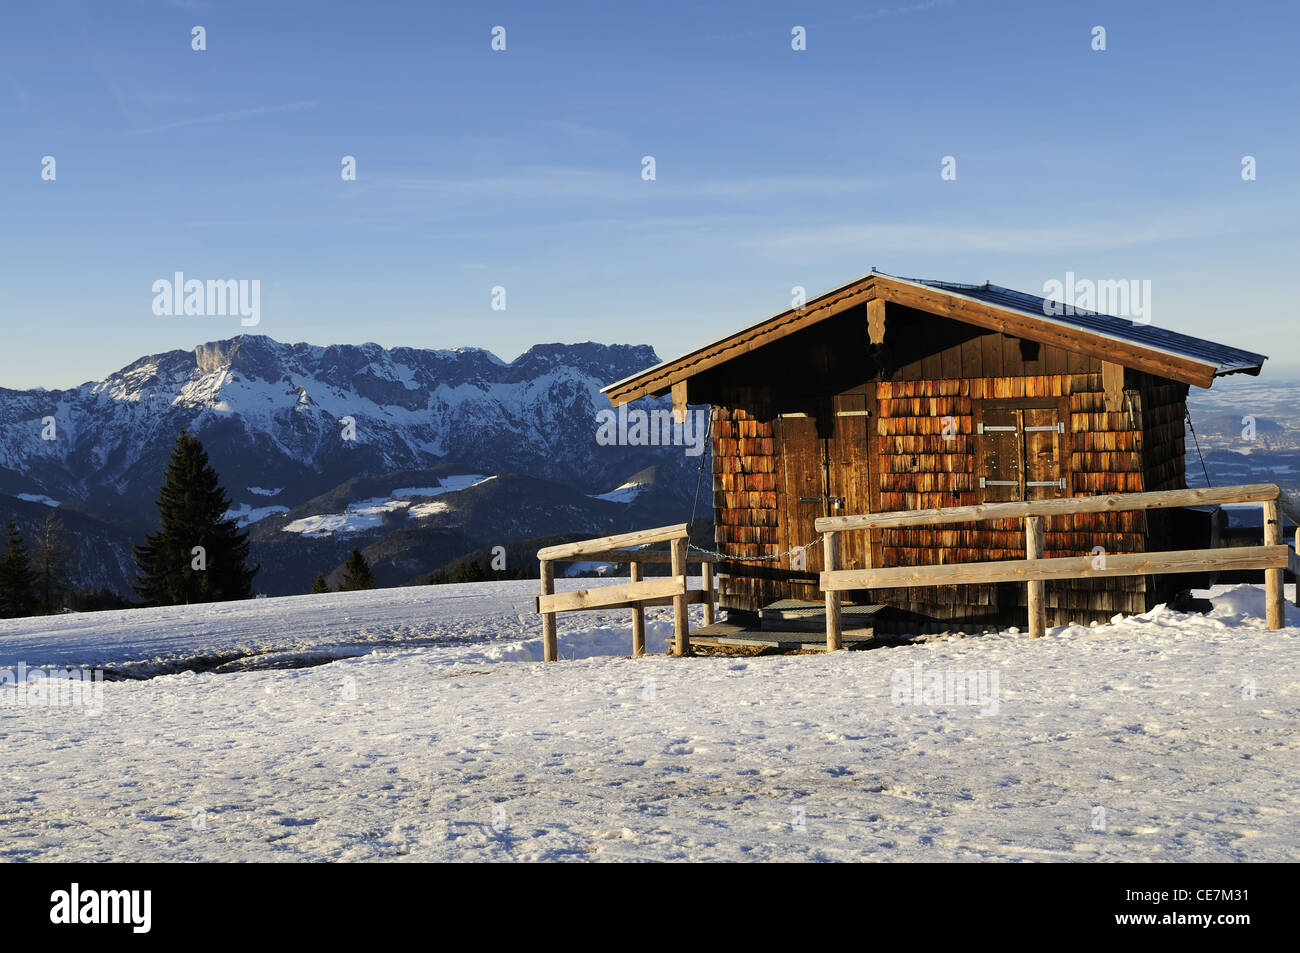 Alpine hut in the snow covered winter scenery, Bavarian Alps, Germany. Stock Photo